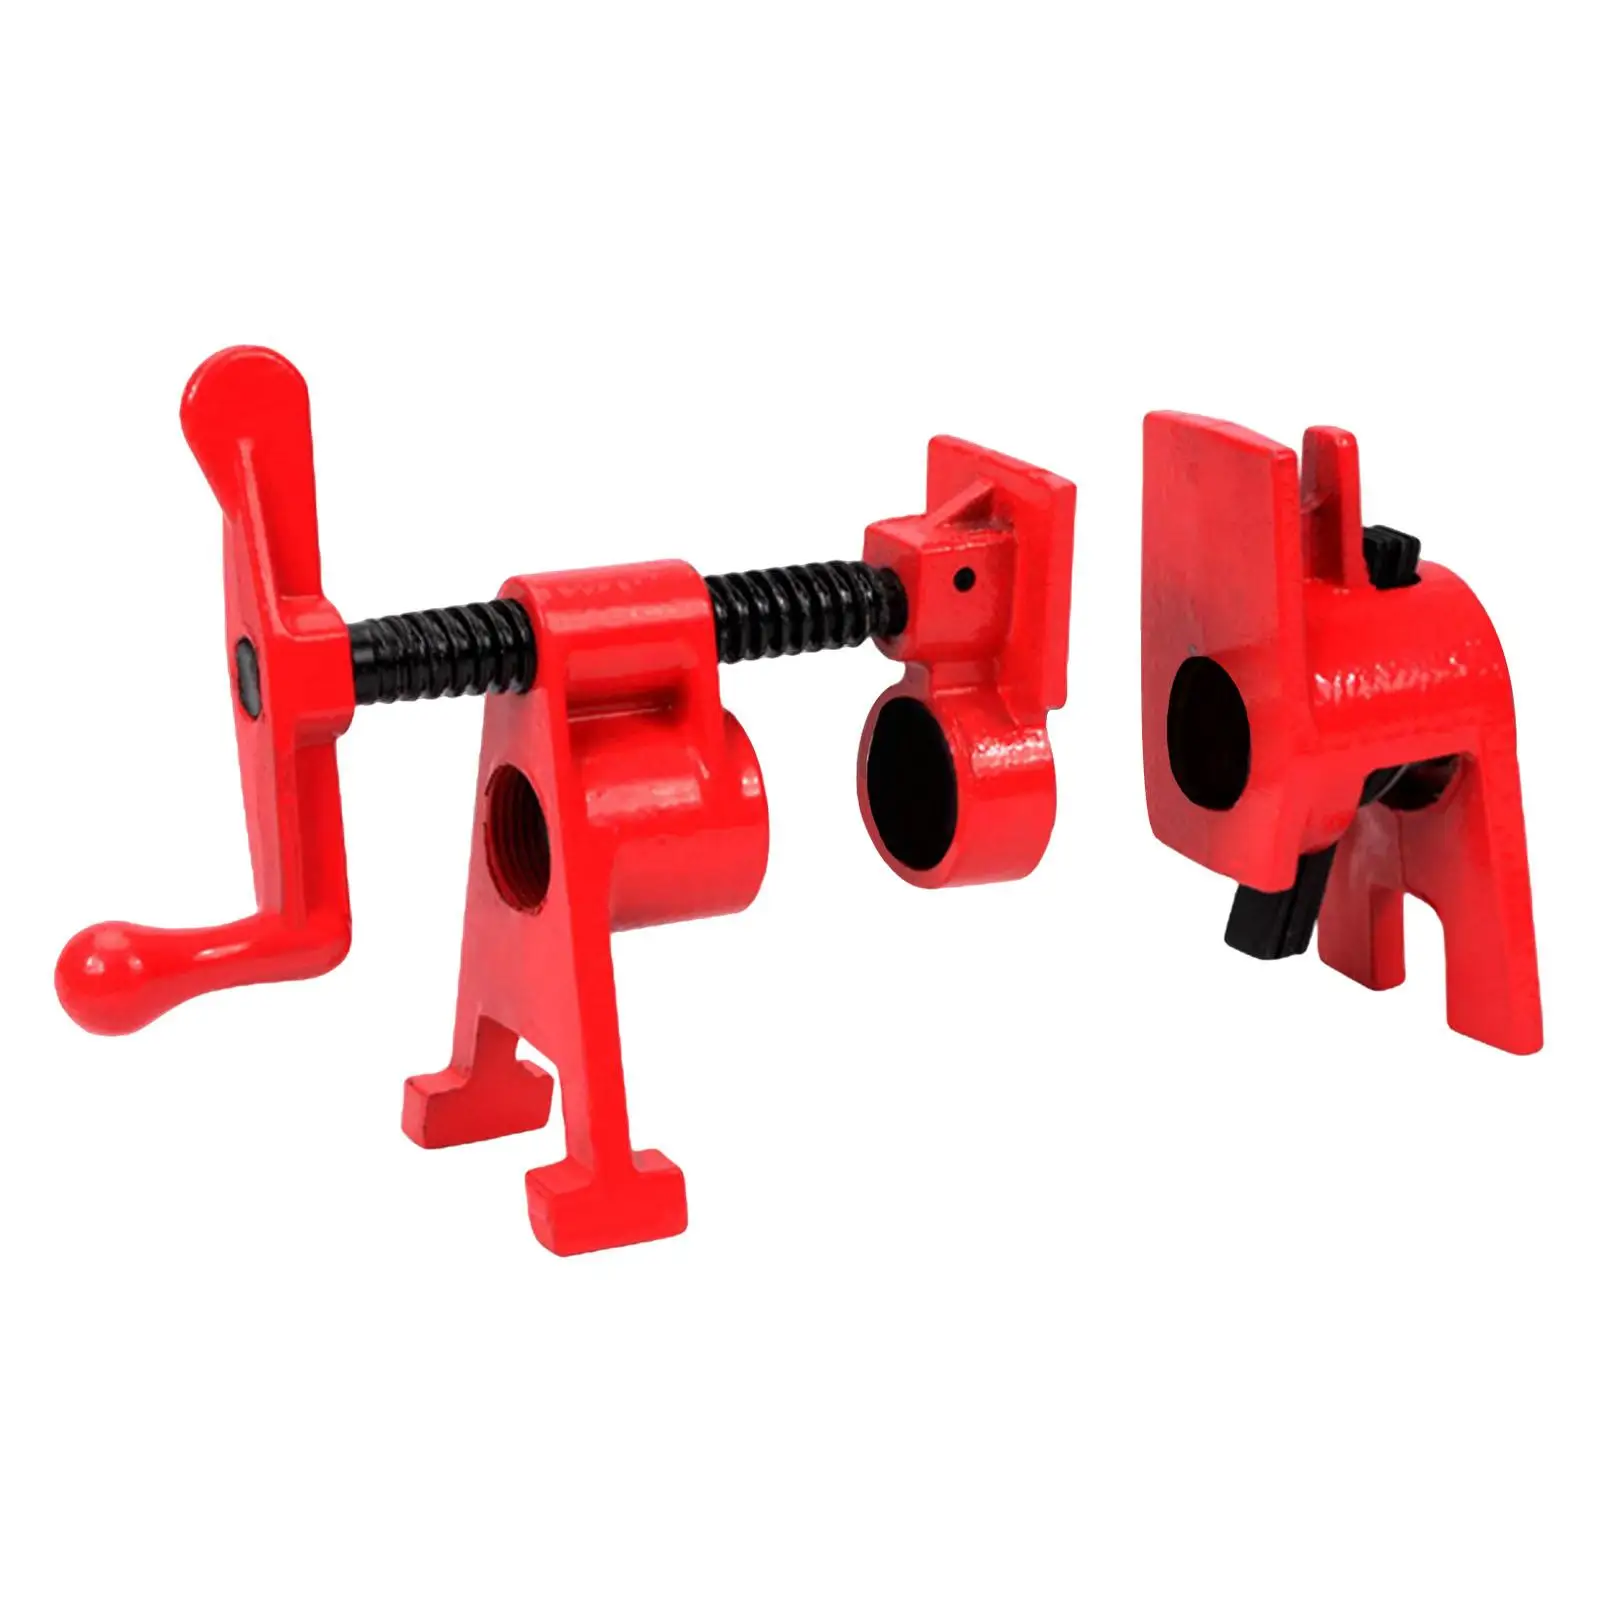 3/4 inch  Clamp Woodworking  Wood Gluing  Clamp Set Carpenter Hand Tool Wide Base